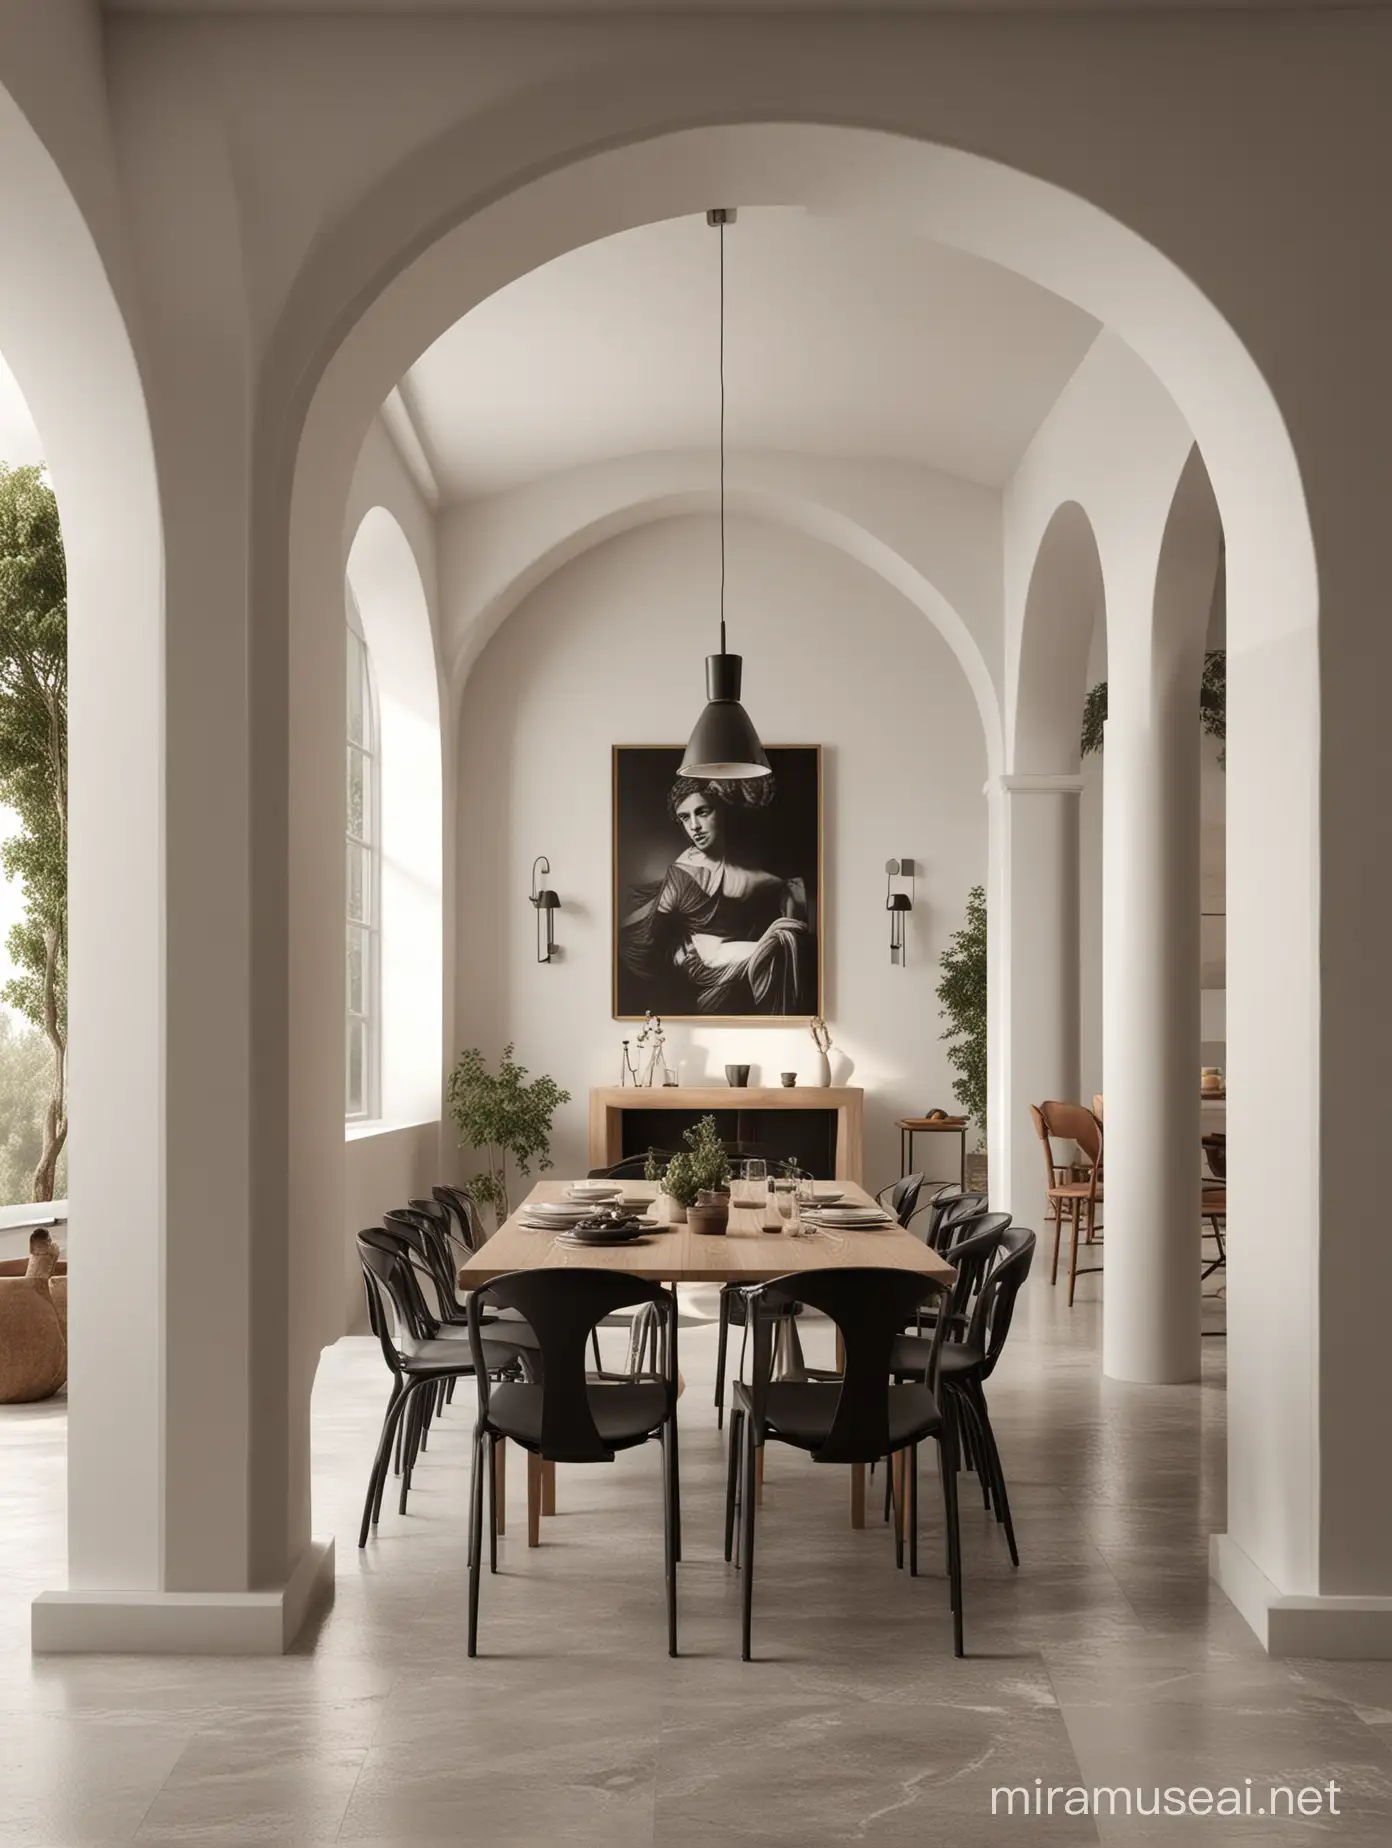 hyper realistic render of a modern dining room by studio nina, in the style of greek and roman art and architecture, ethereal and otherworldly atmosphere, subdued minimalism, contrasting shadows, arched doorways, light black and brown, black and white mastery